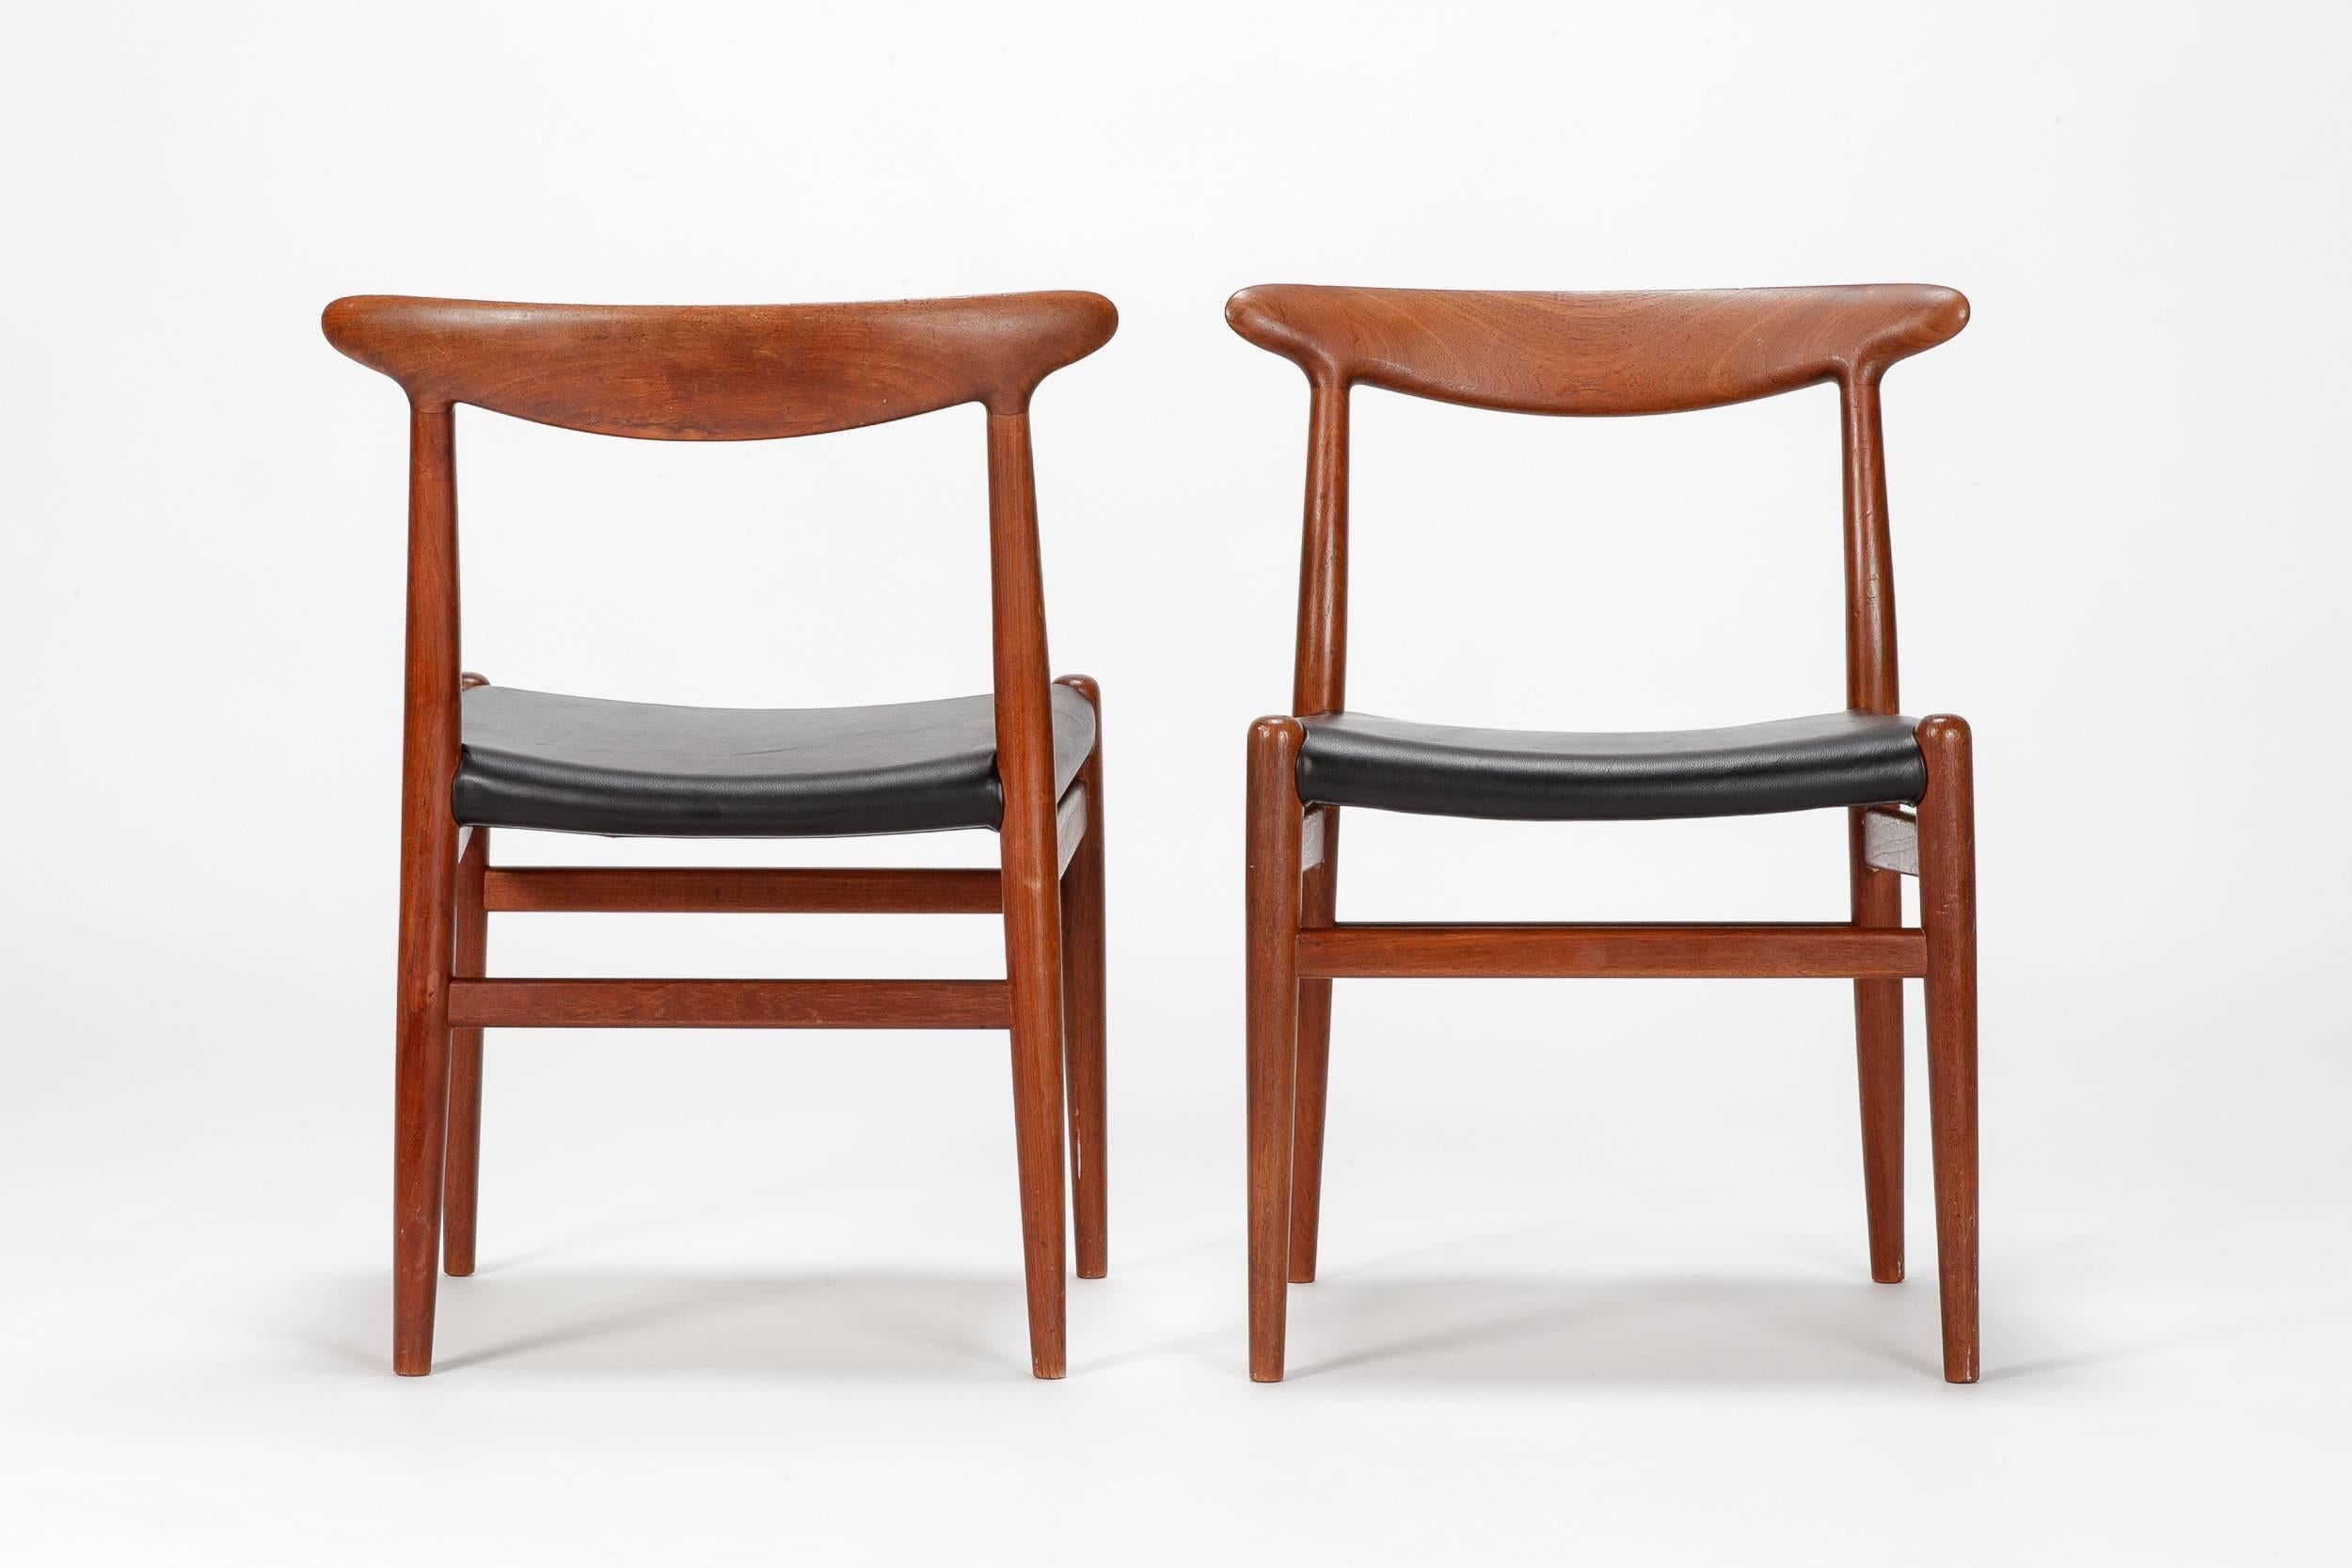 Pair of Hans Wegner chairs, model W2 designed in 1953 and manufactured by C.M. Madsen in Denmark. The frame is made of solid teak wood, the seat covers are made of soft leather. Very typical Wegner shape with round organic elements, solid